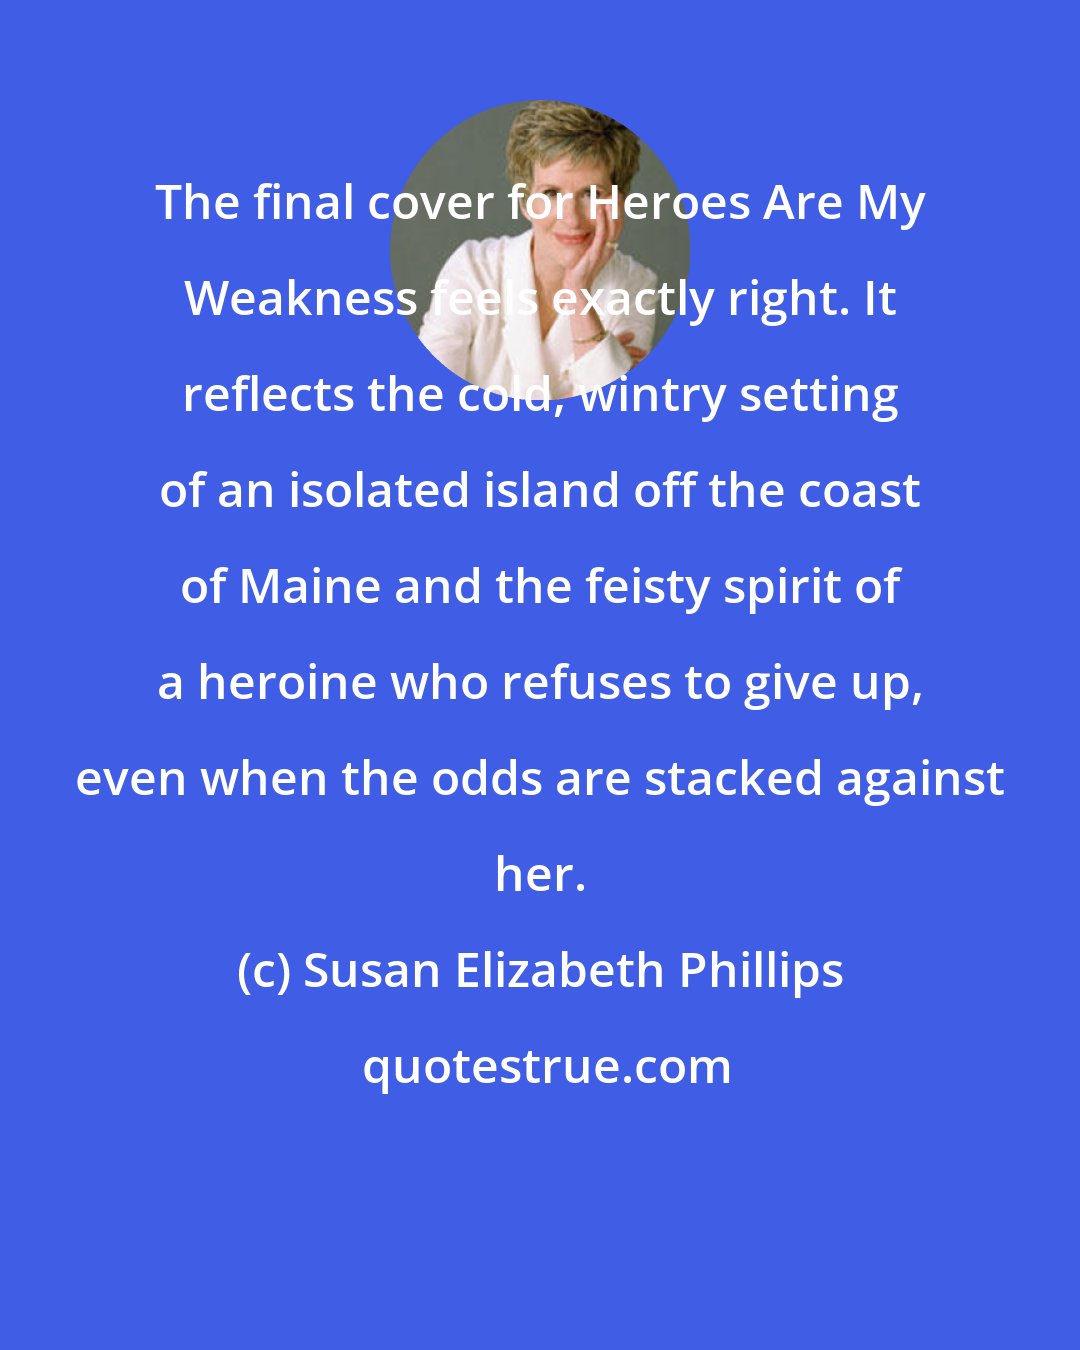 Susan Elizabeth Phillips: The final cover for Heroes Are My Weakness feels exactly right. It reflects the cold, wintry setting of an isolated island off the coast of Maine and the feisty spirit of a heroine who refuses to give up, even when the odds are stacked against her.